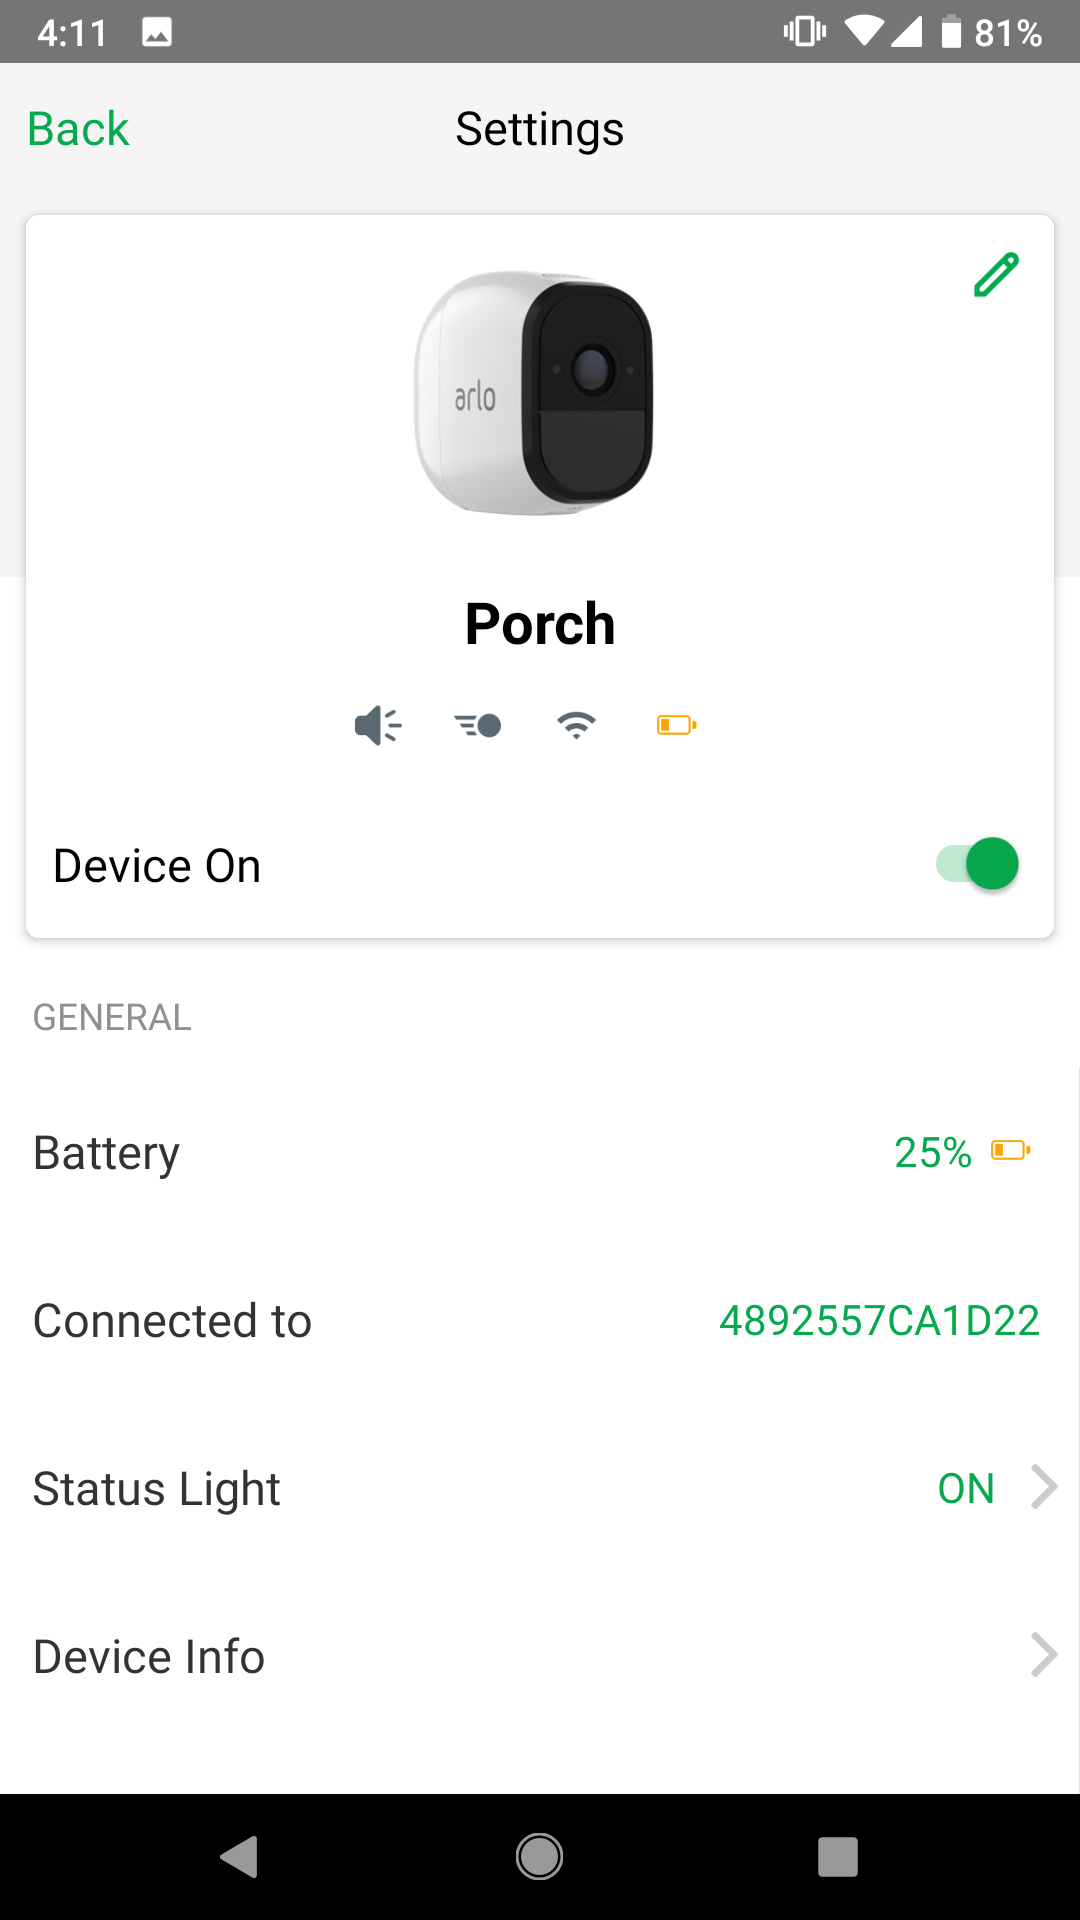 arlo pro 2 app for android